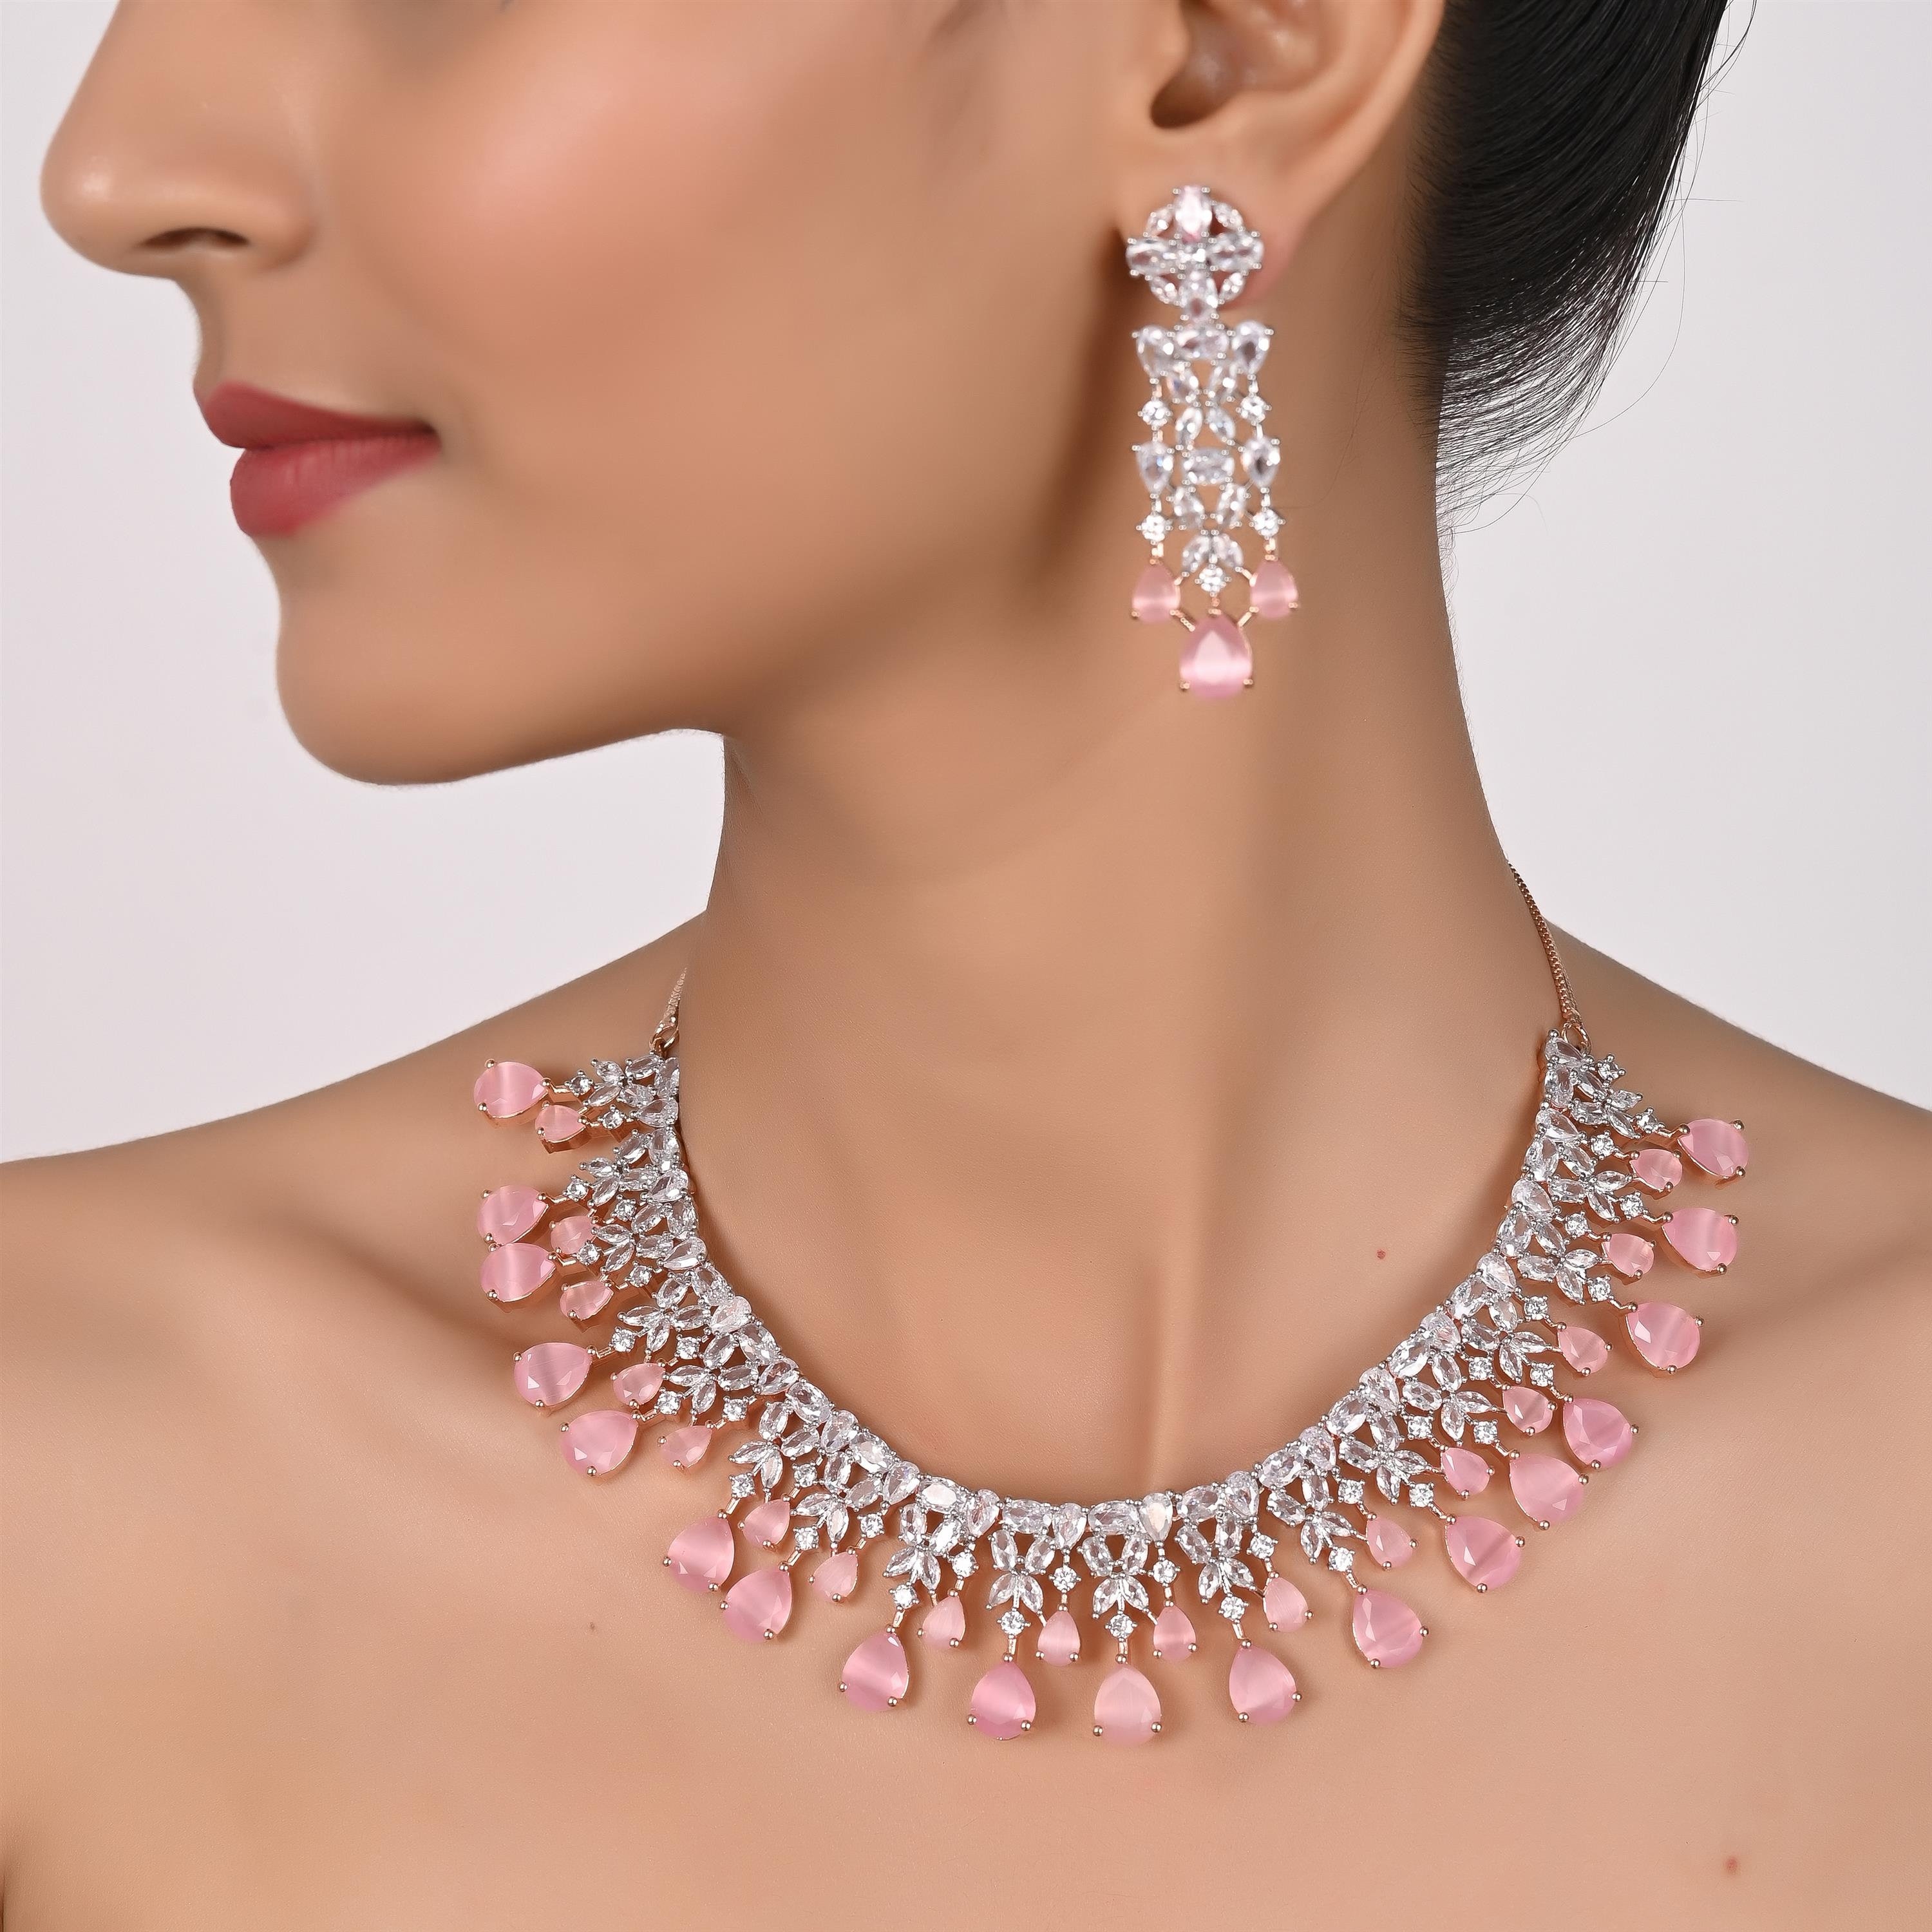 Silver Luxury Jewelry Necklace Wedding | Hot Pink Earrings Necklace Sets -  Hot Pink - Aliexpress